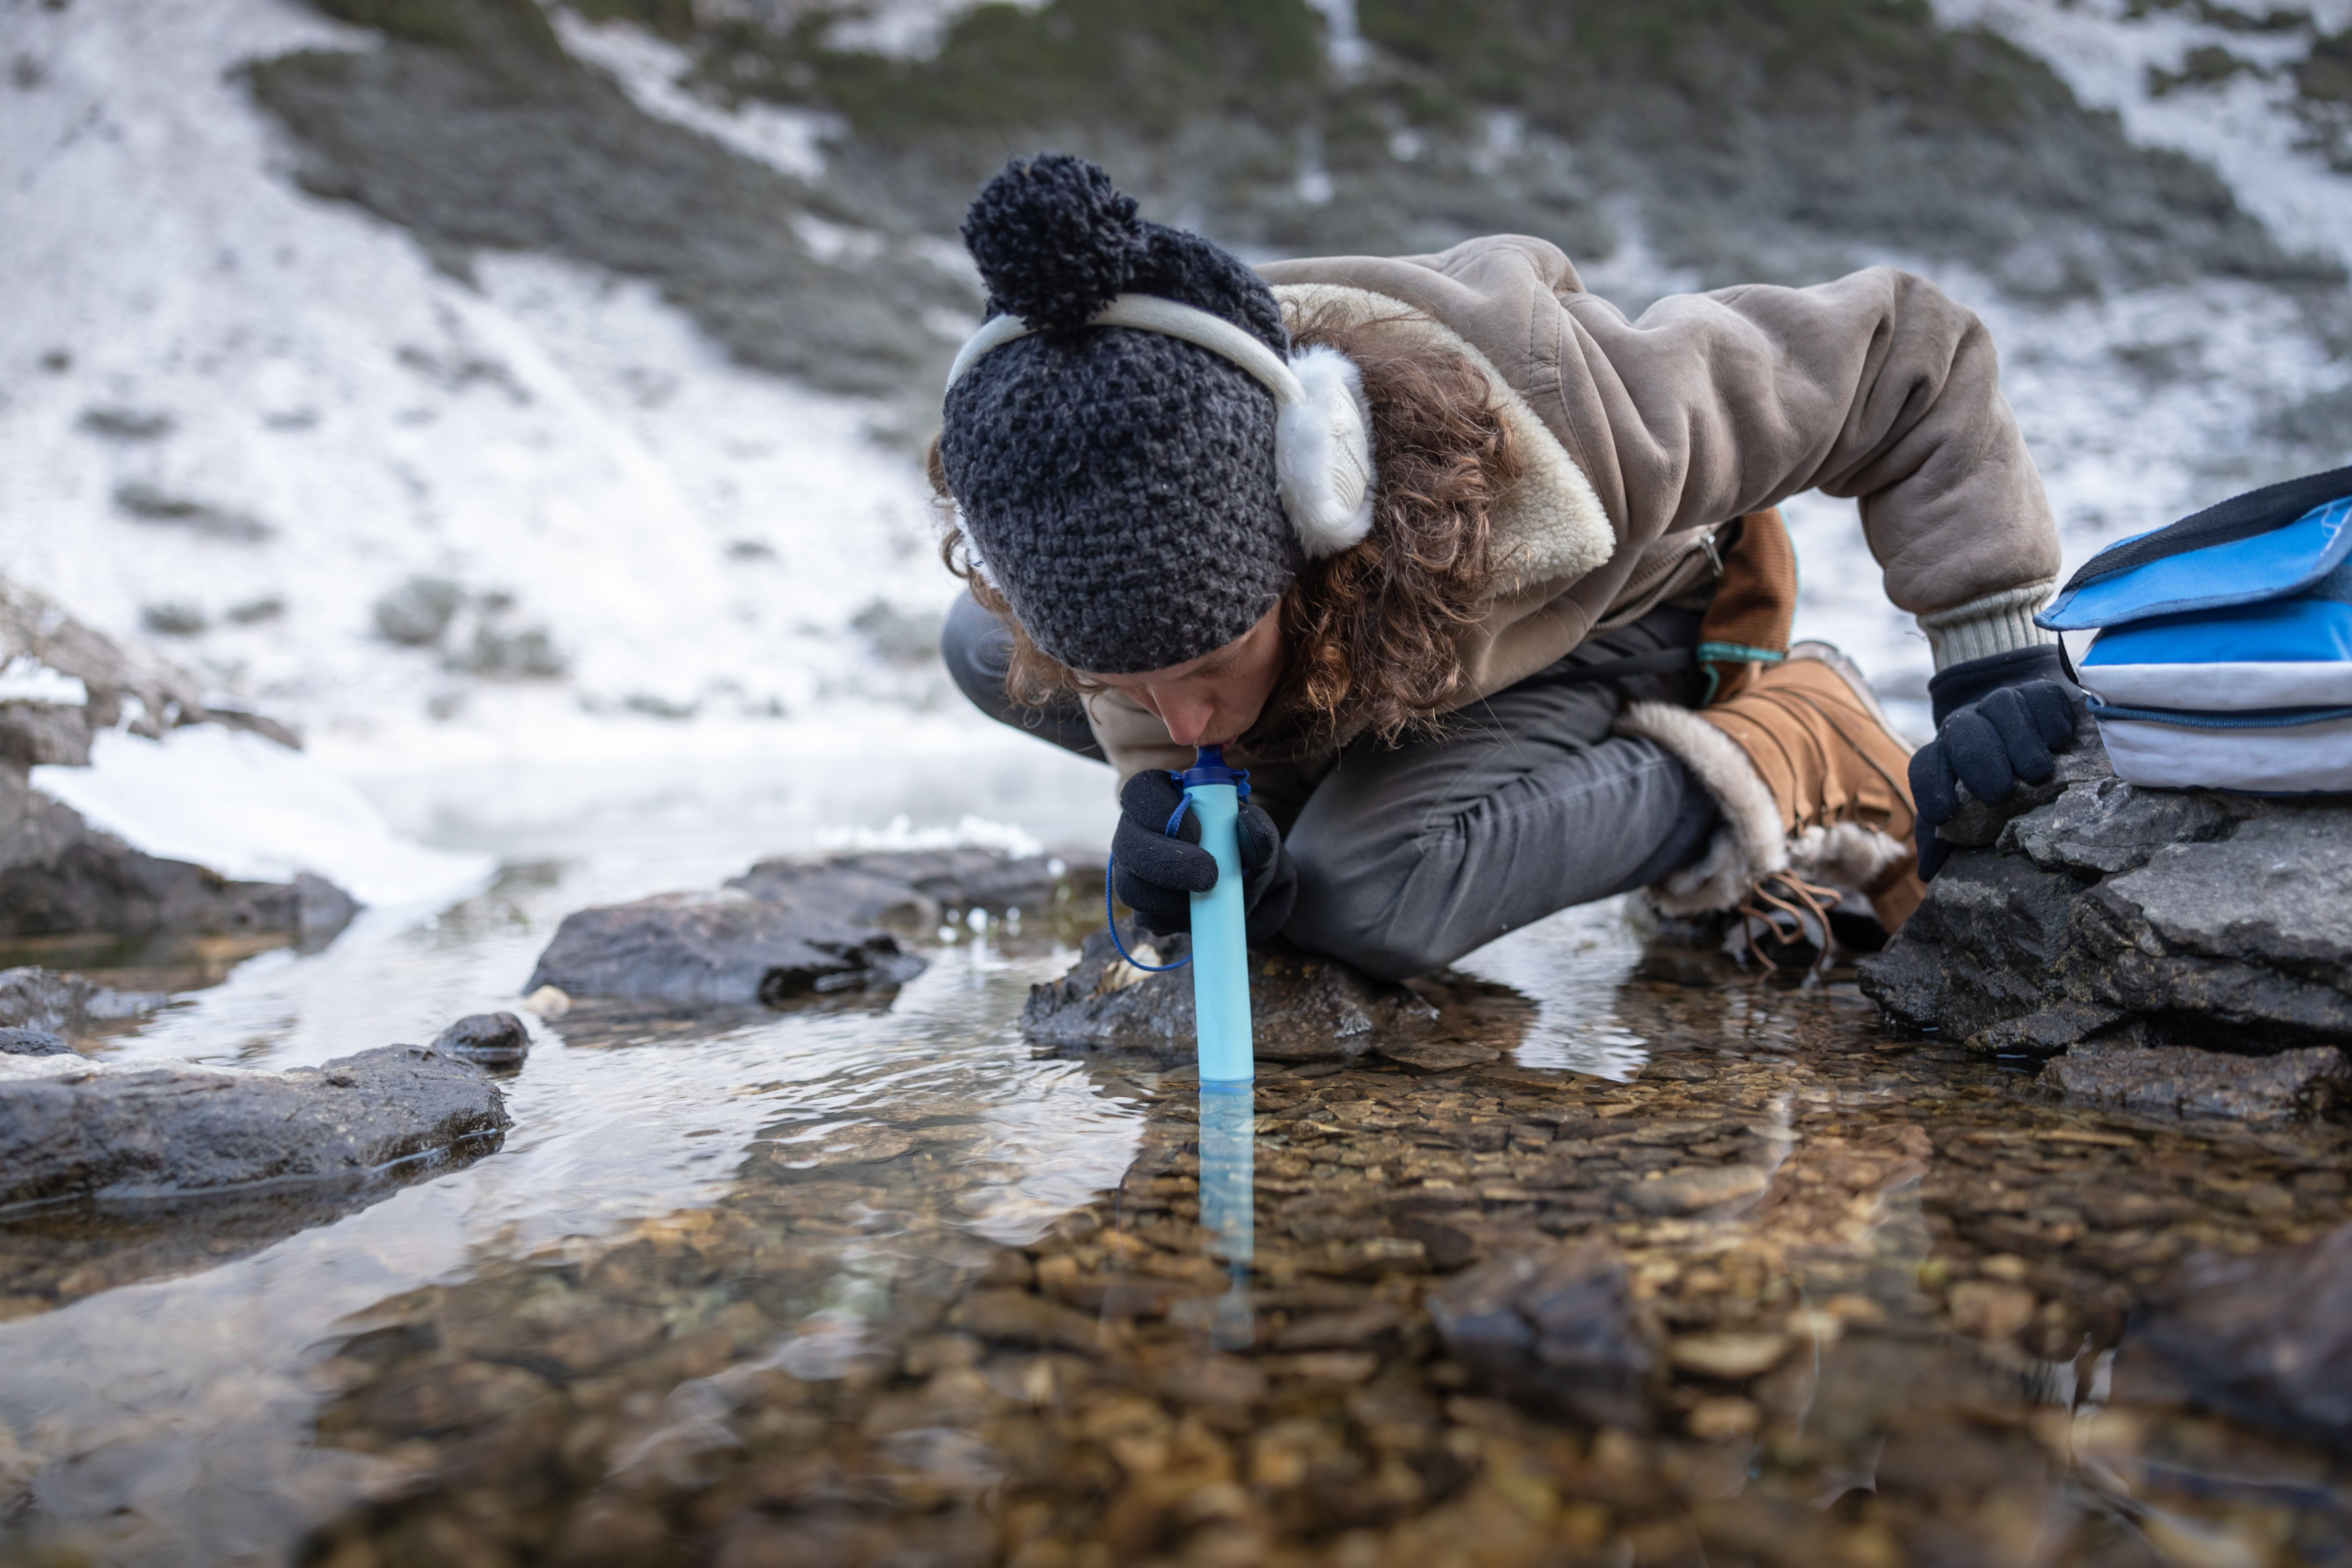 A woman drinking from a live stream using lifestraw